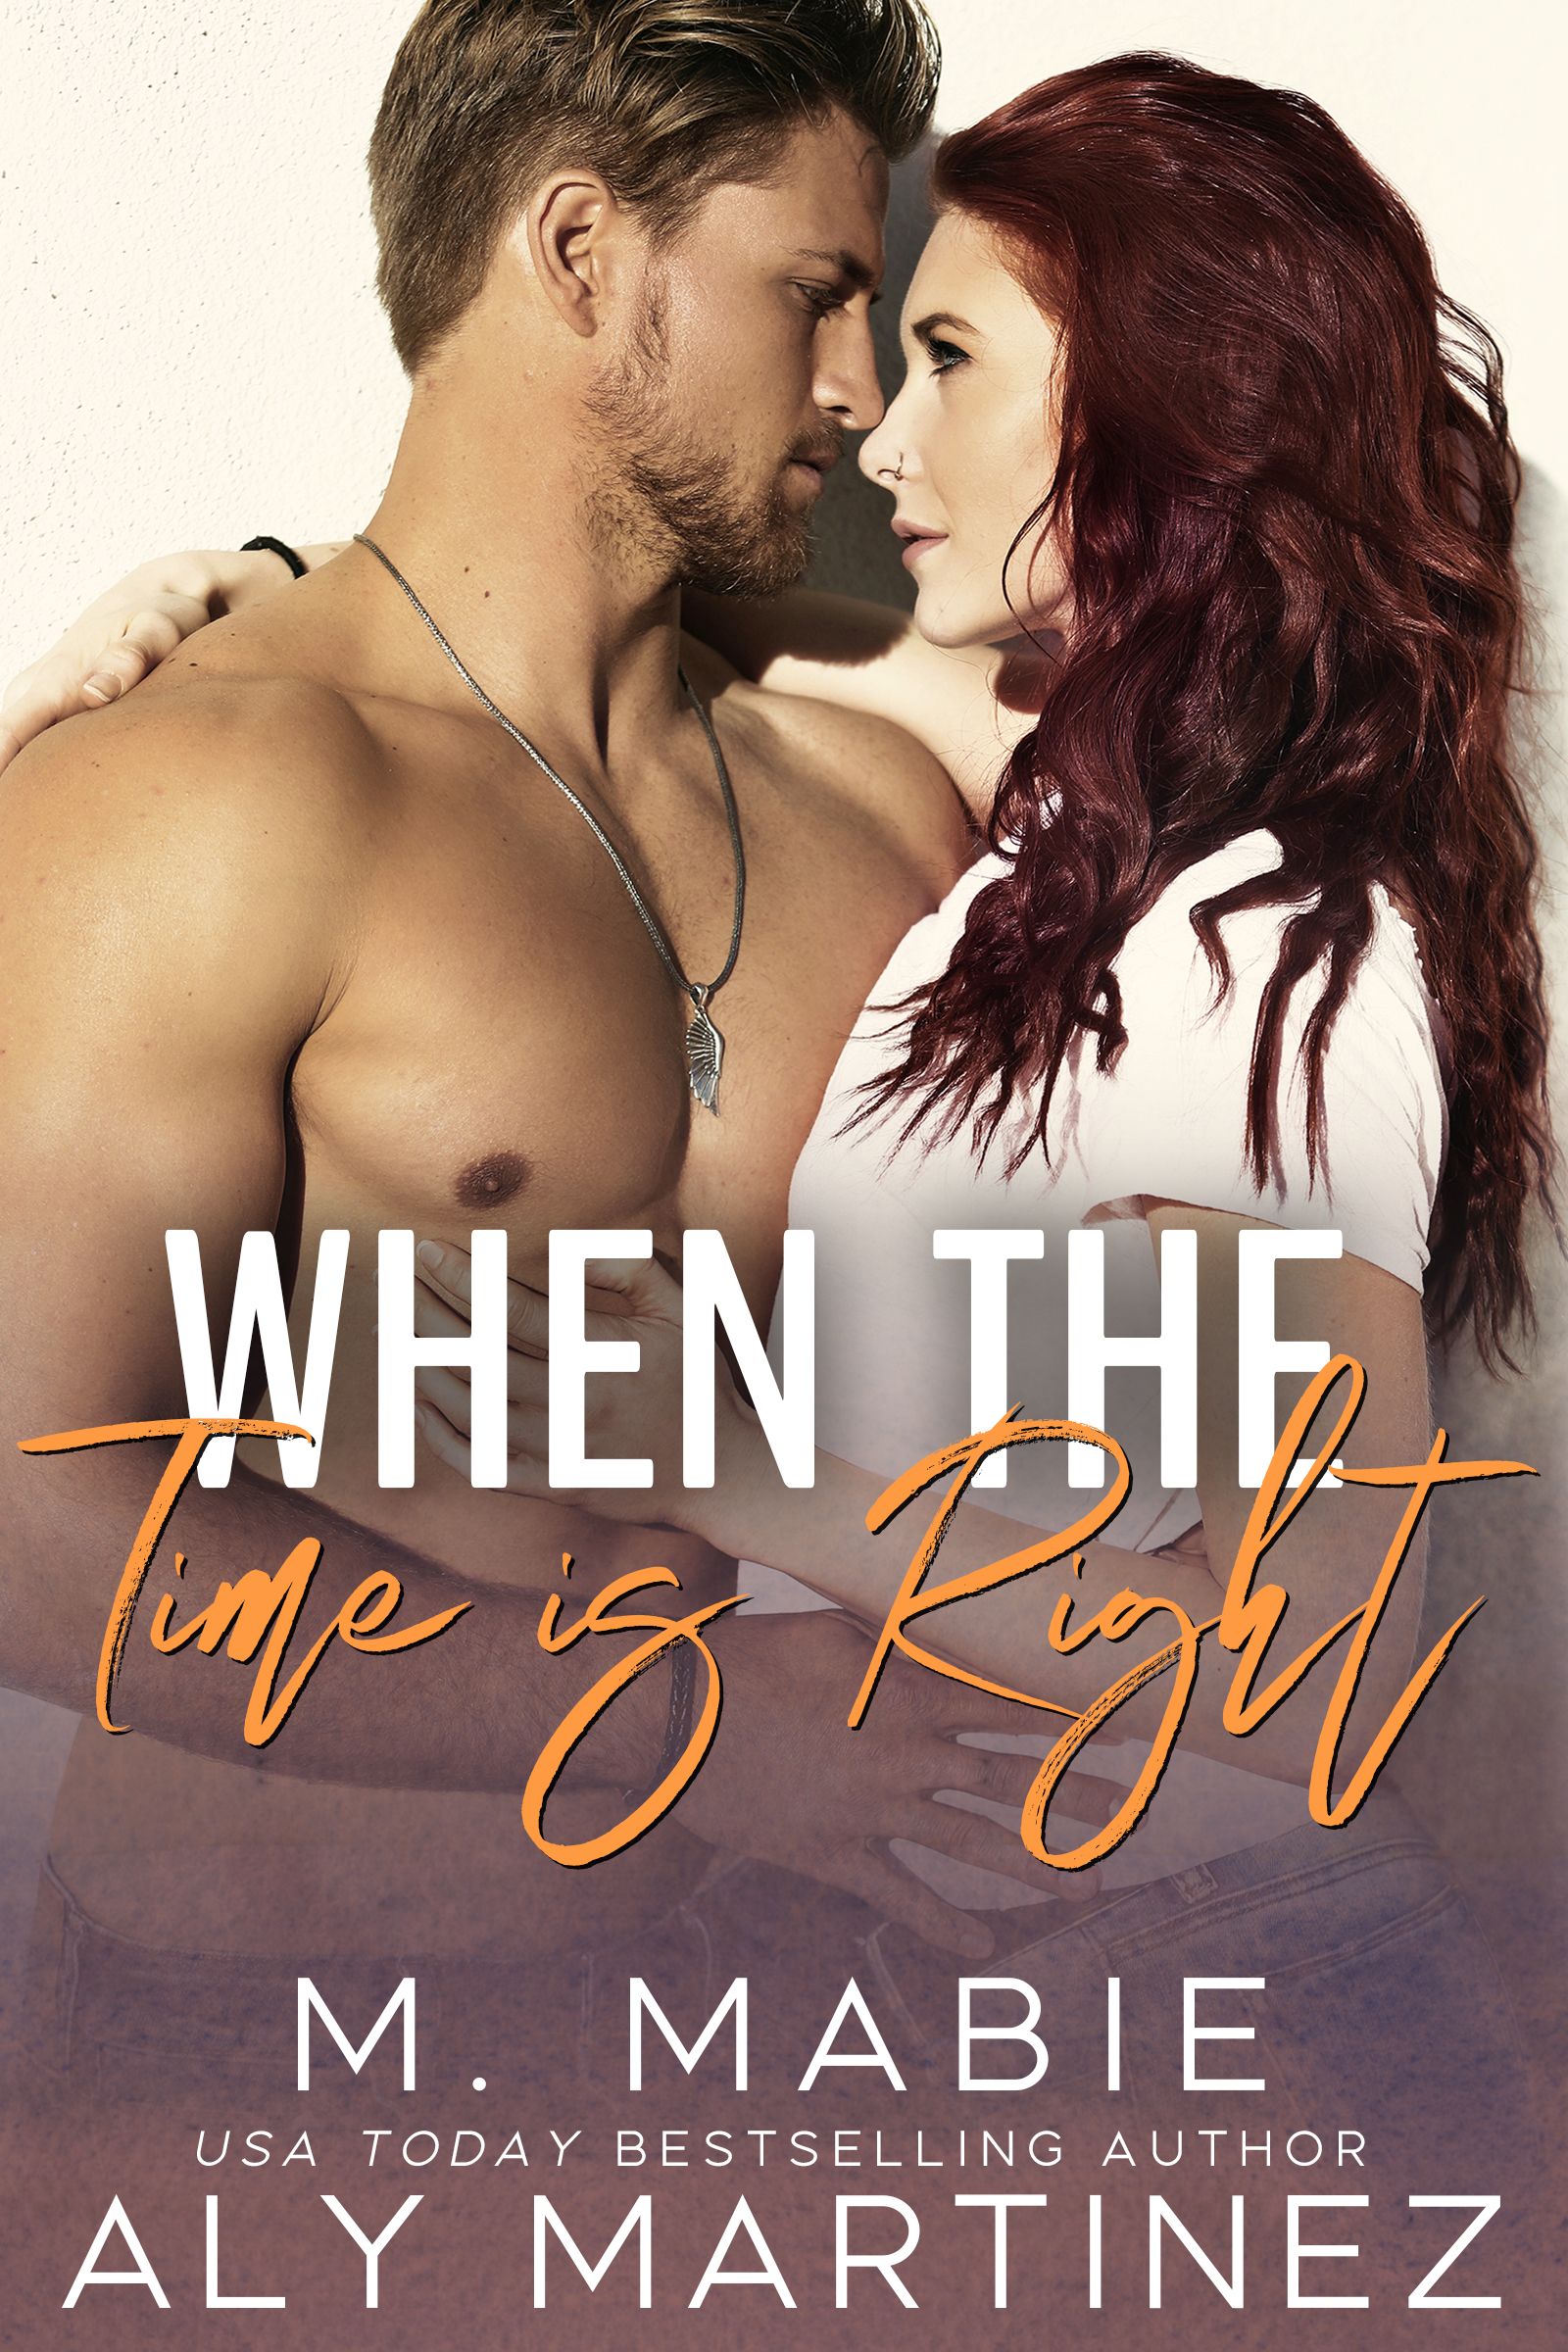 When the Time is Right by Aly Martinez  and M. Mabie 💞